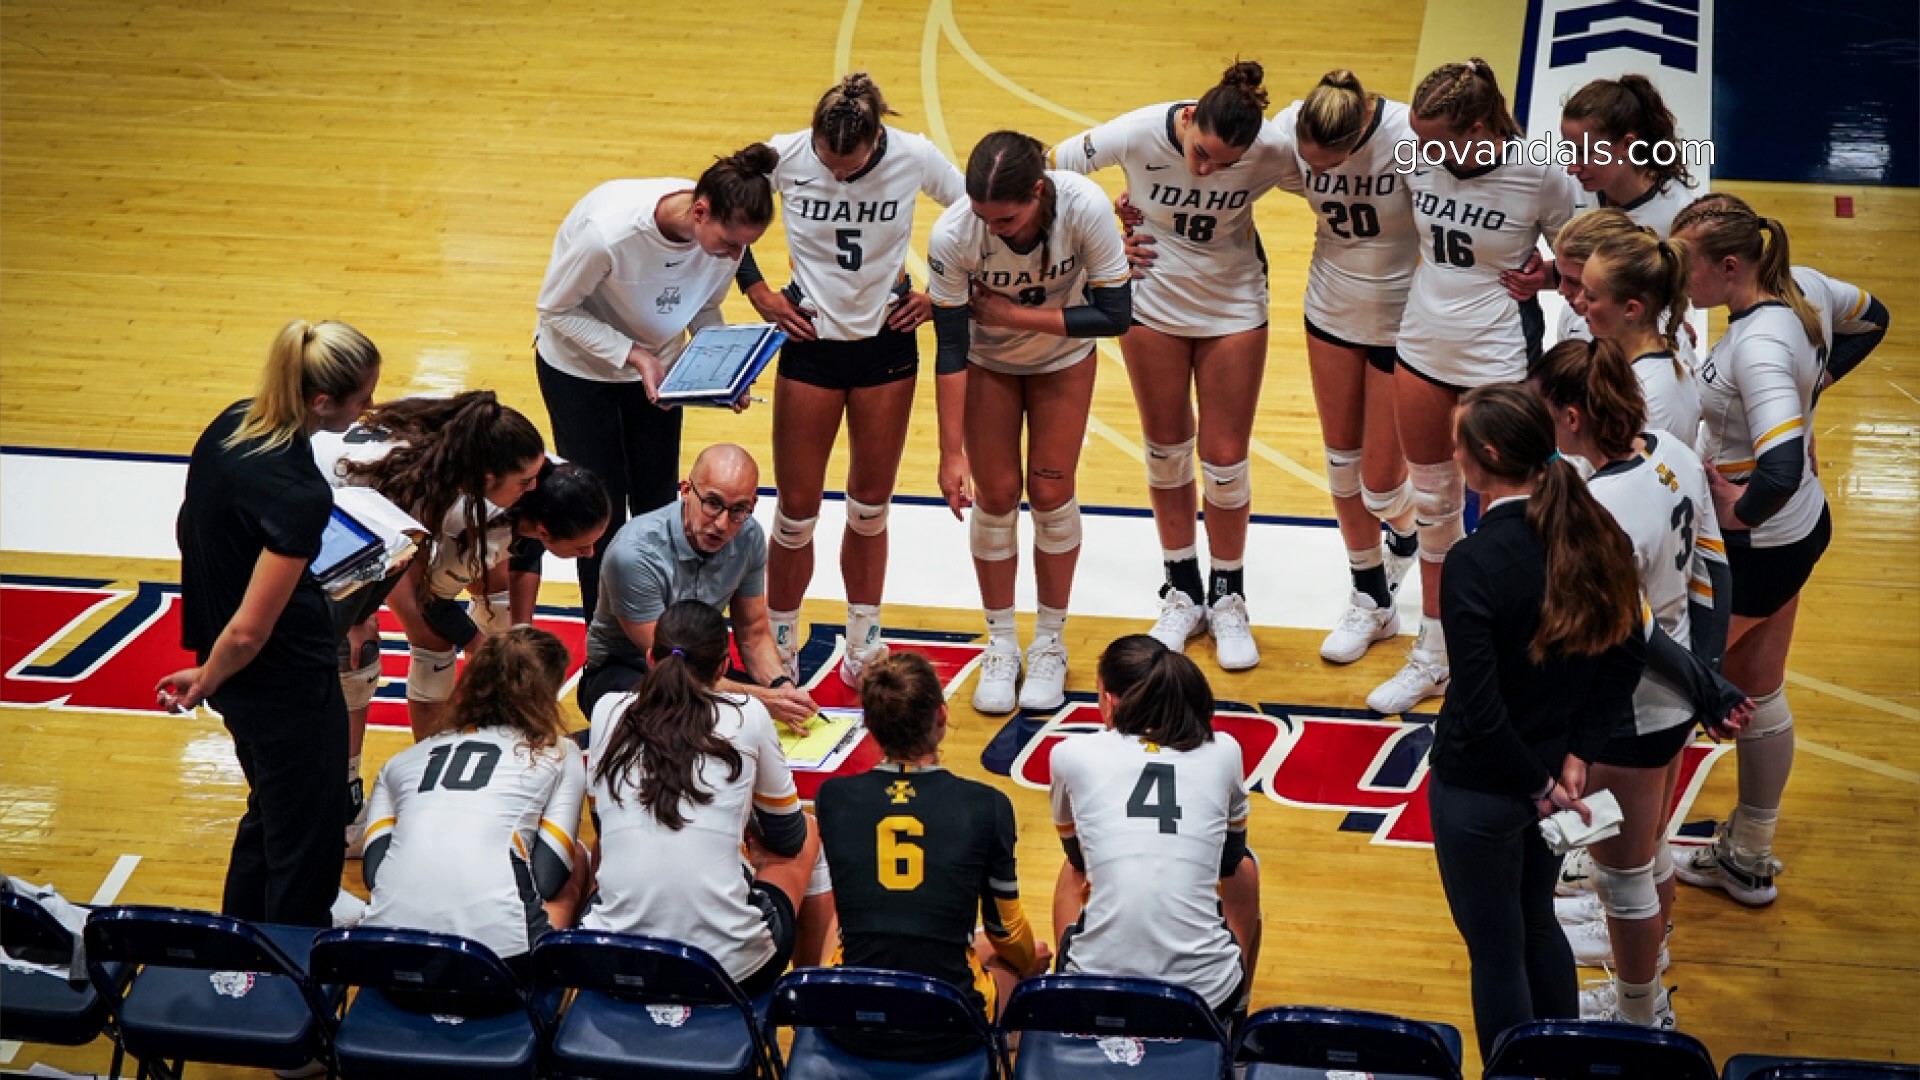 Over a dozen University of Idaho volleyball players are urging school officials to take action on what they describe as abusive actions from their head coach.